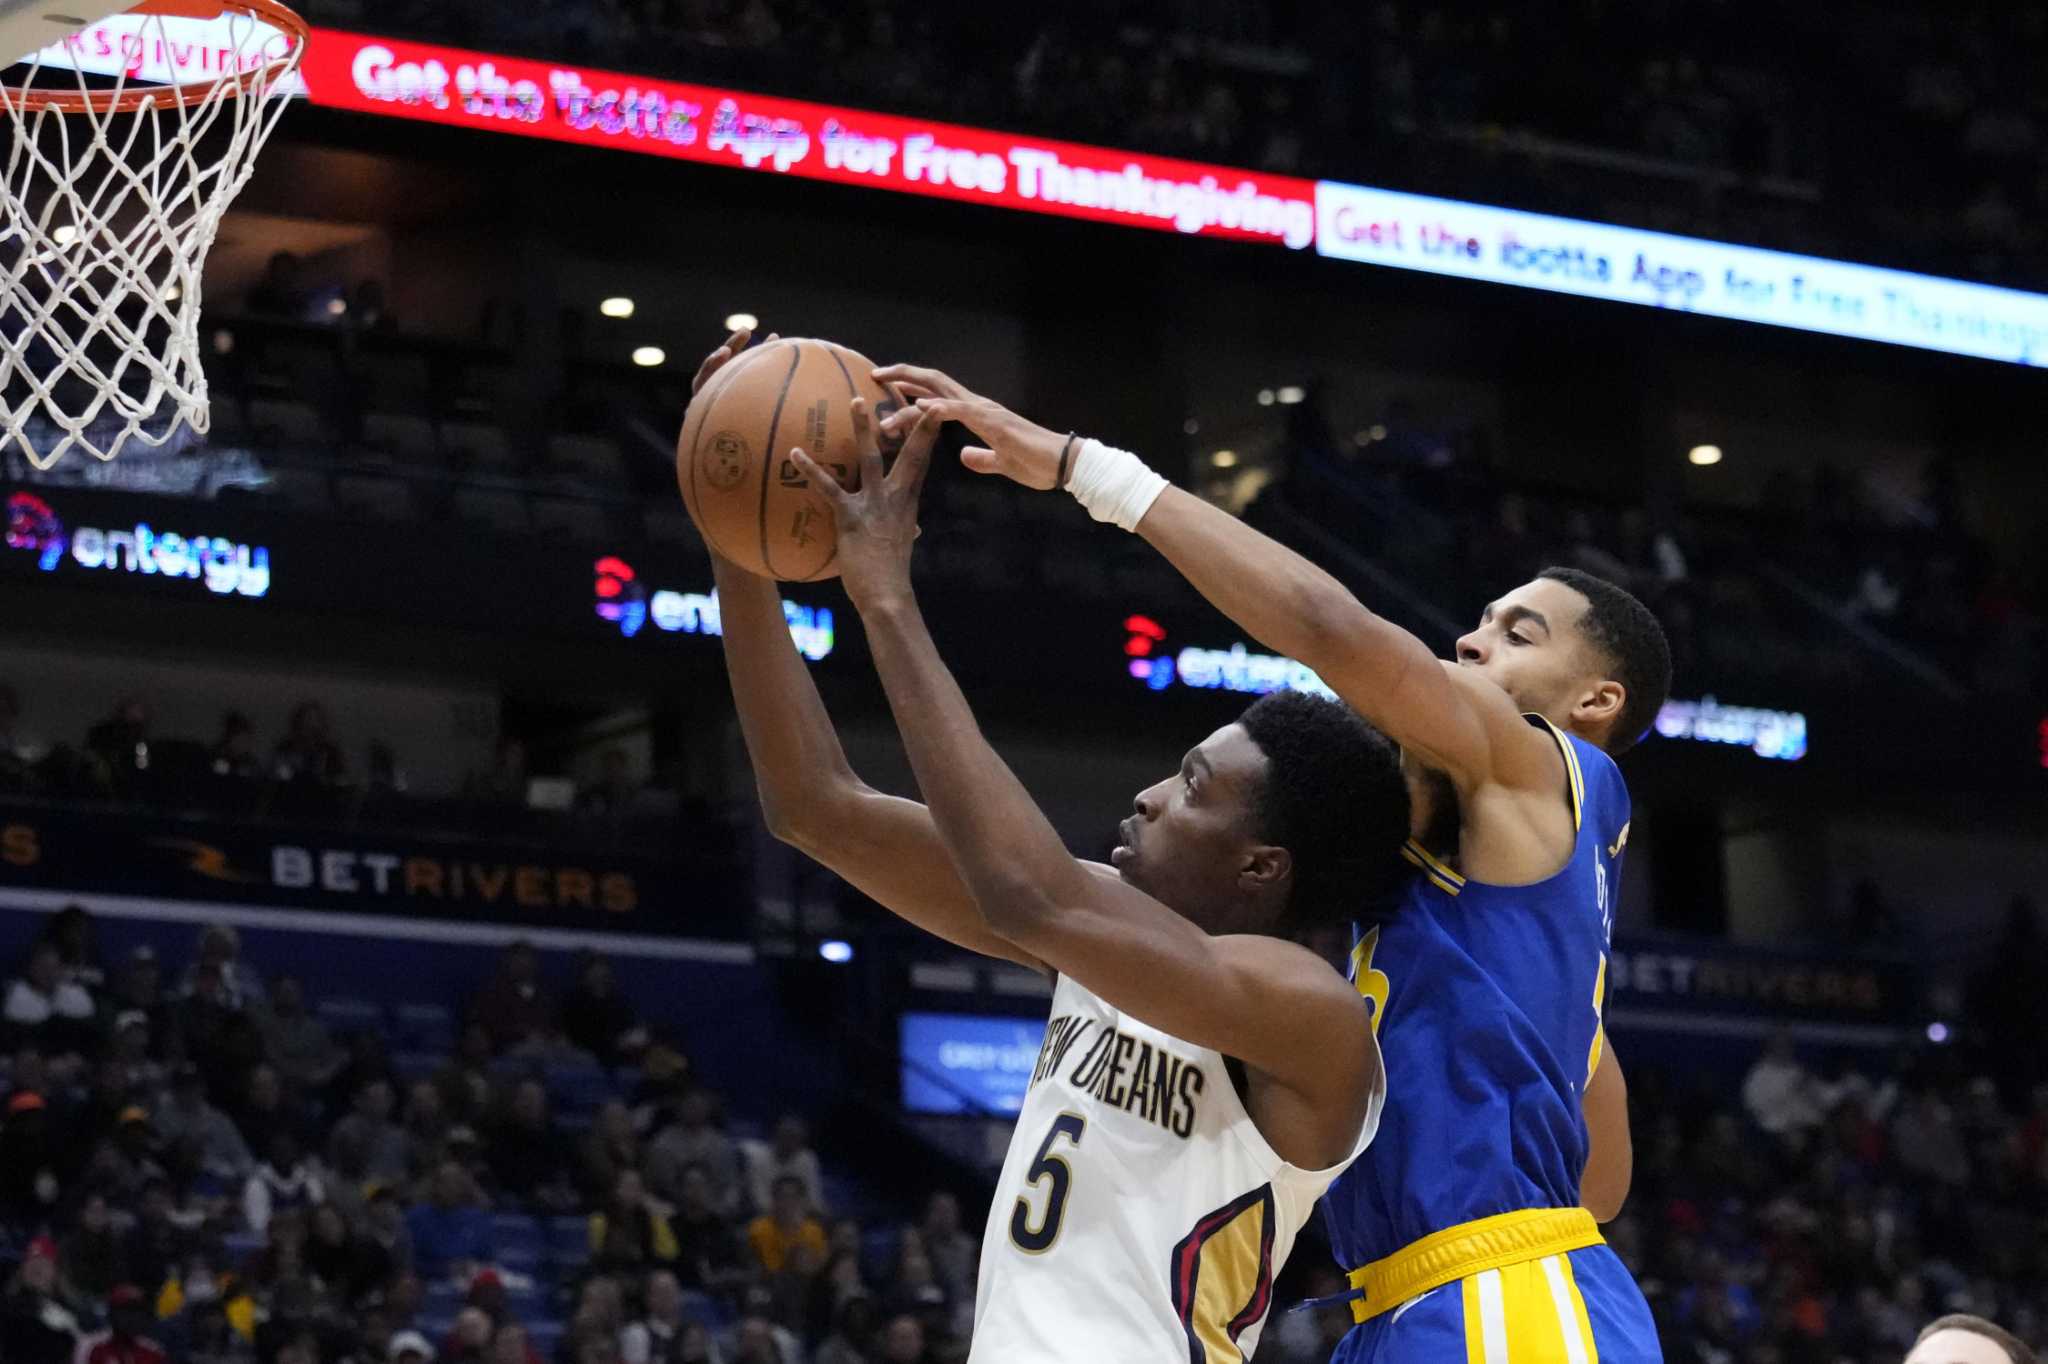 Warriors news: Ryan Rollins put up fourth 20-point game in G League